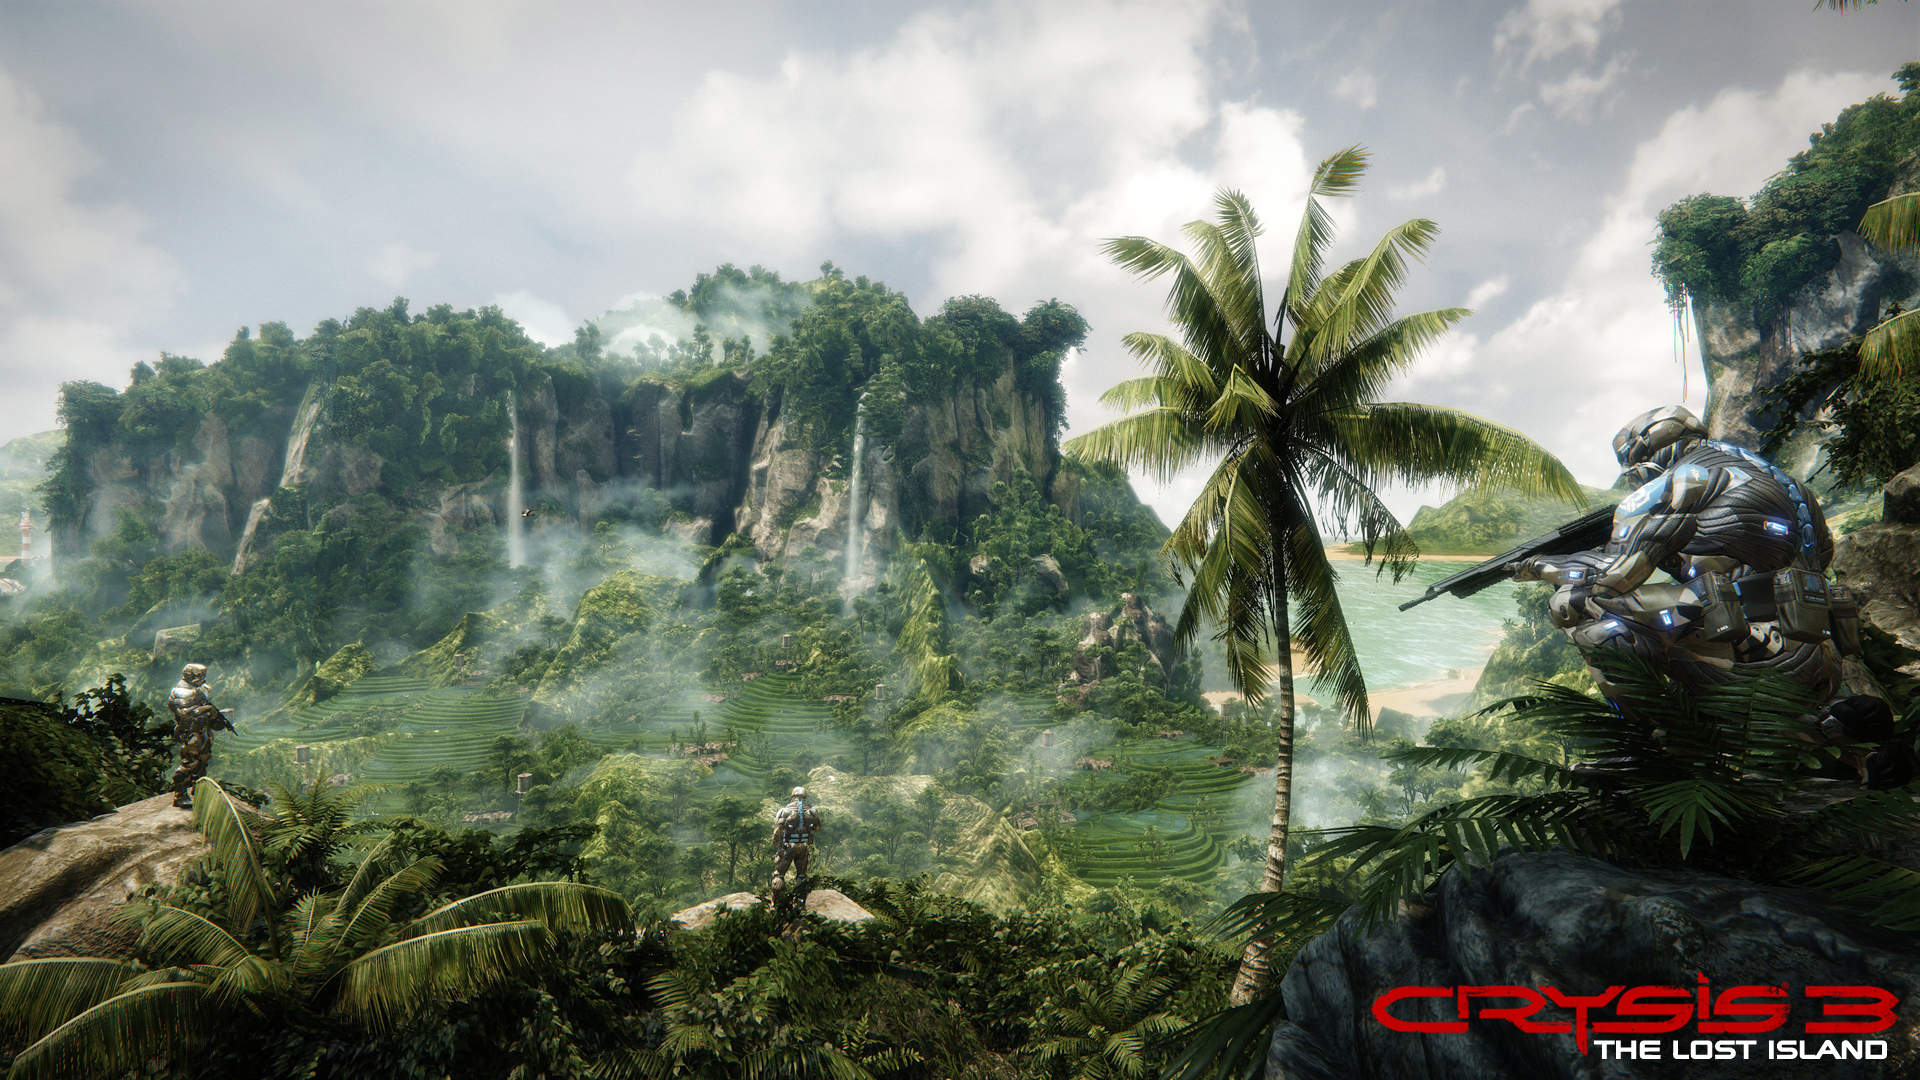 download crysis 3 the lost island for free